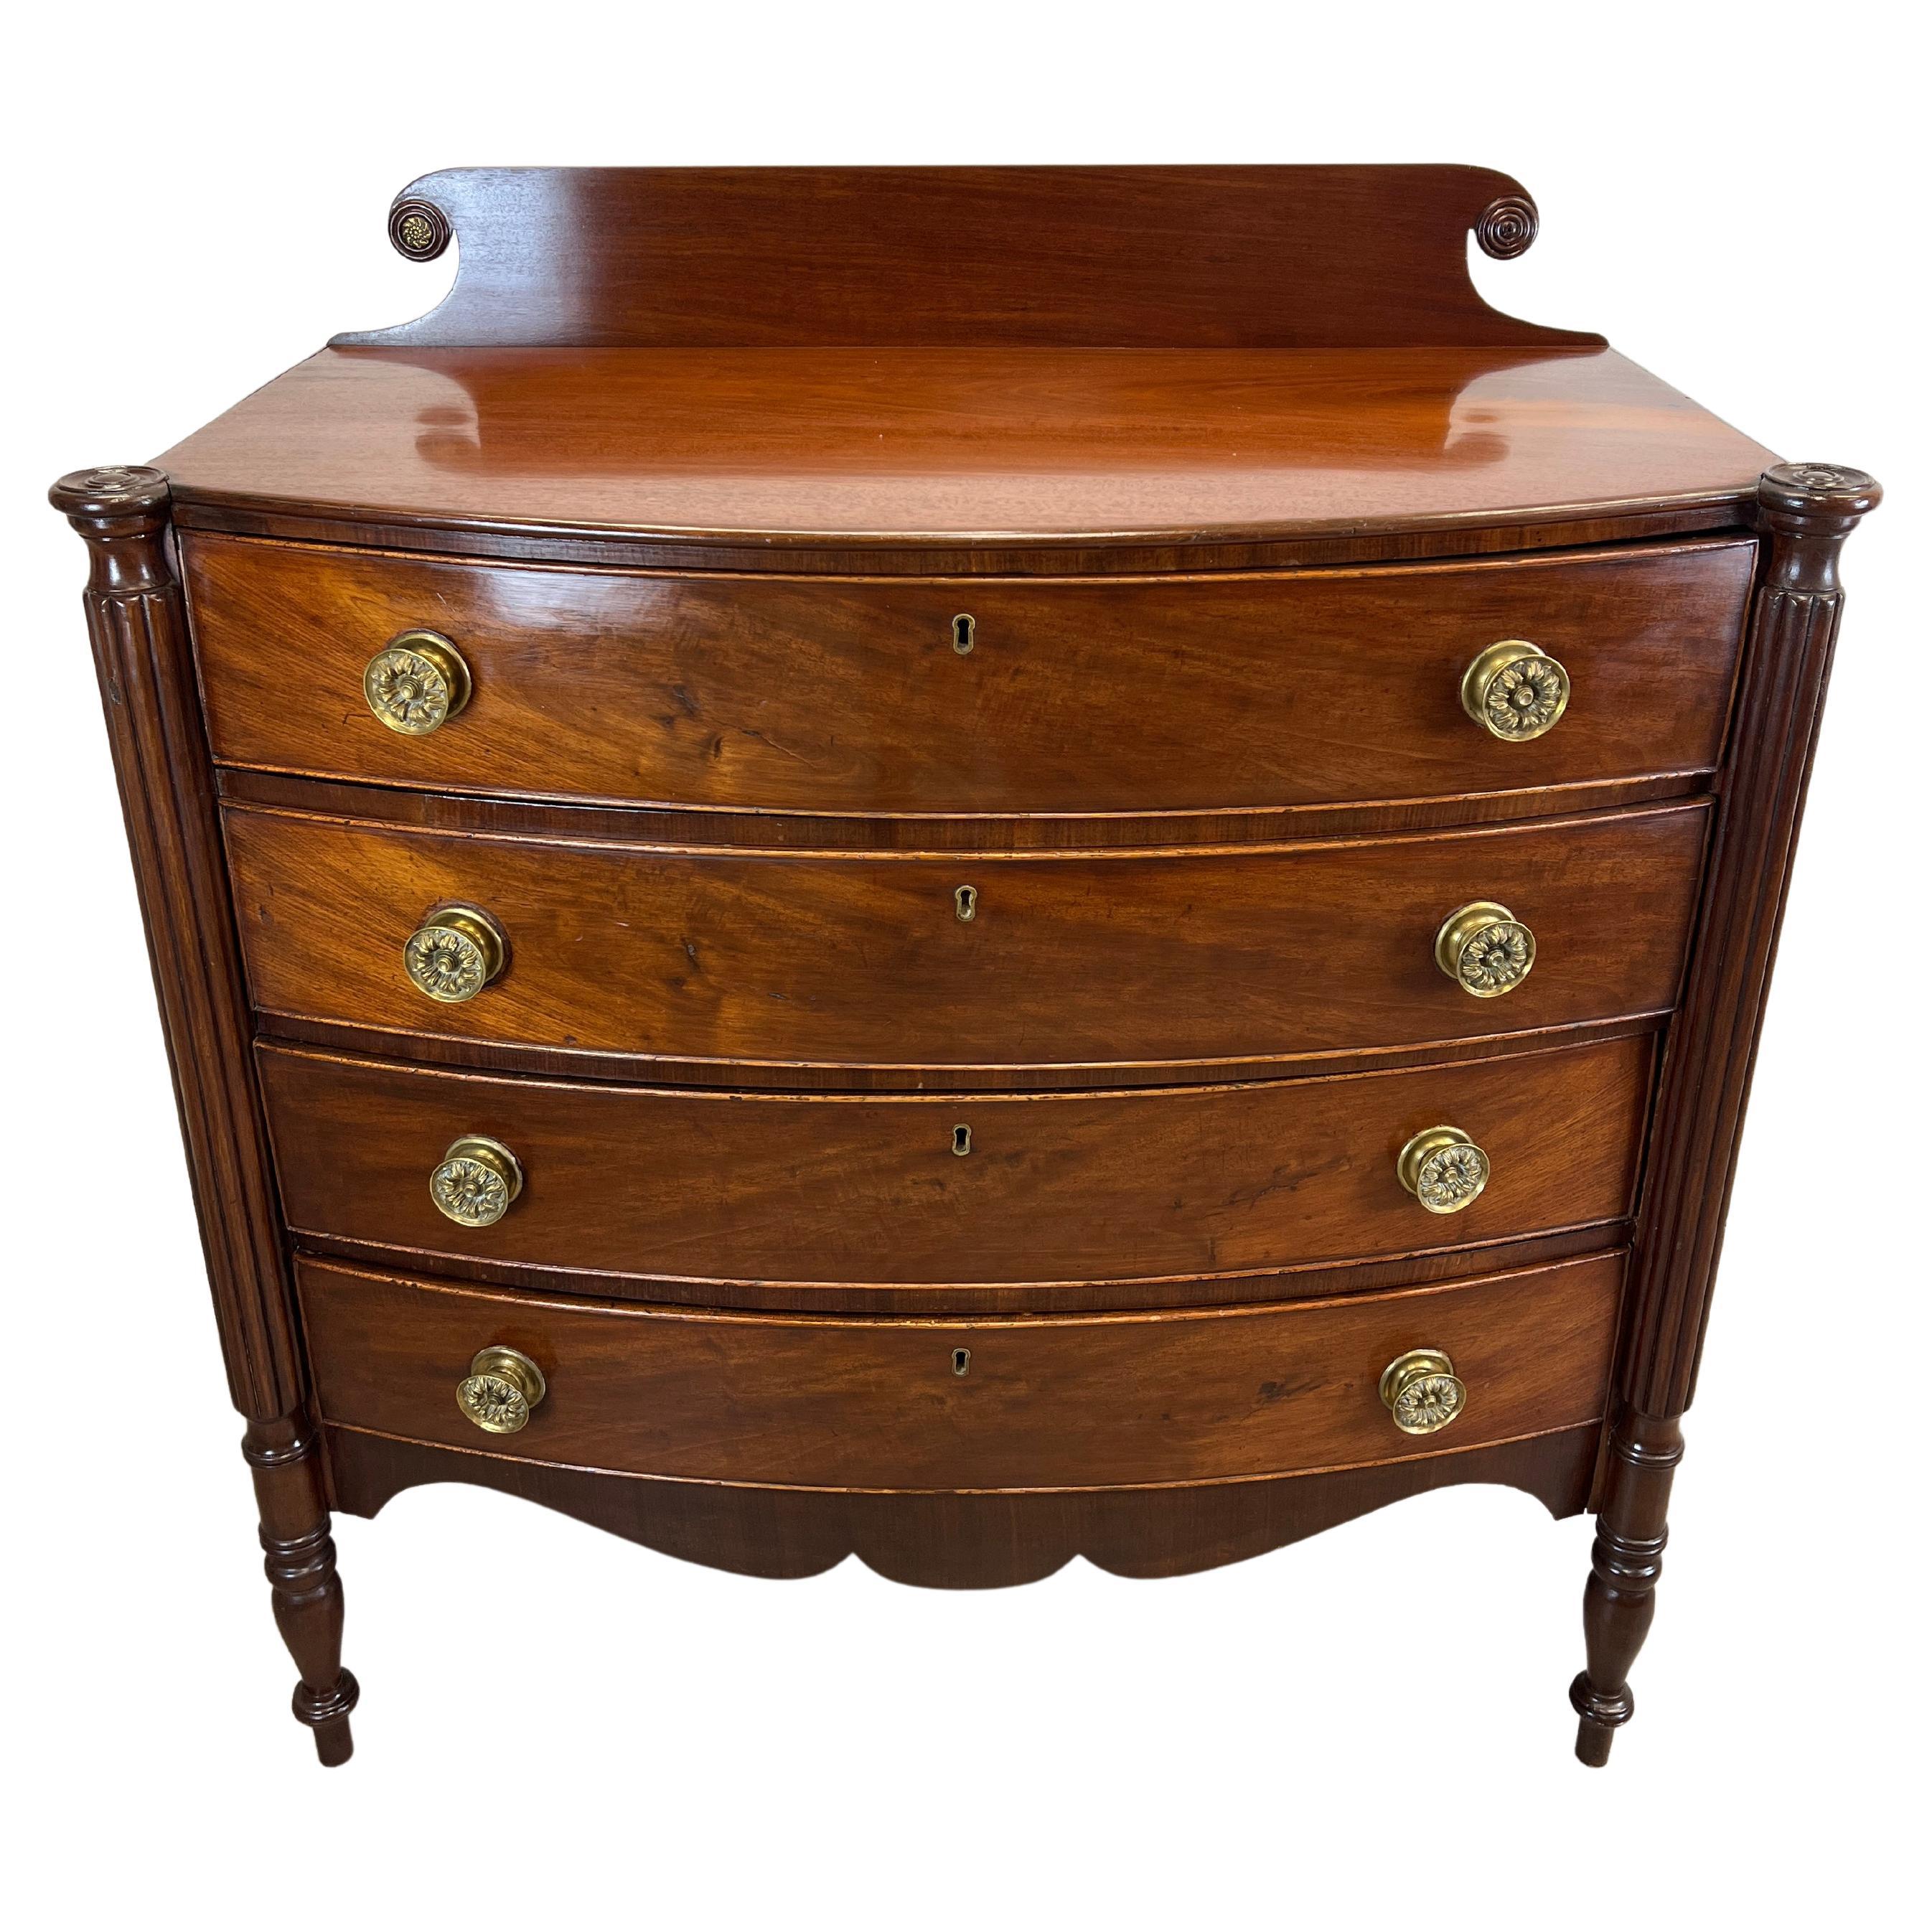 Early 19th Century American Sheraton Bow Front Chest of Drawers